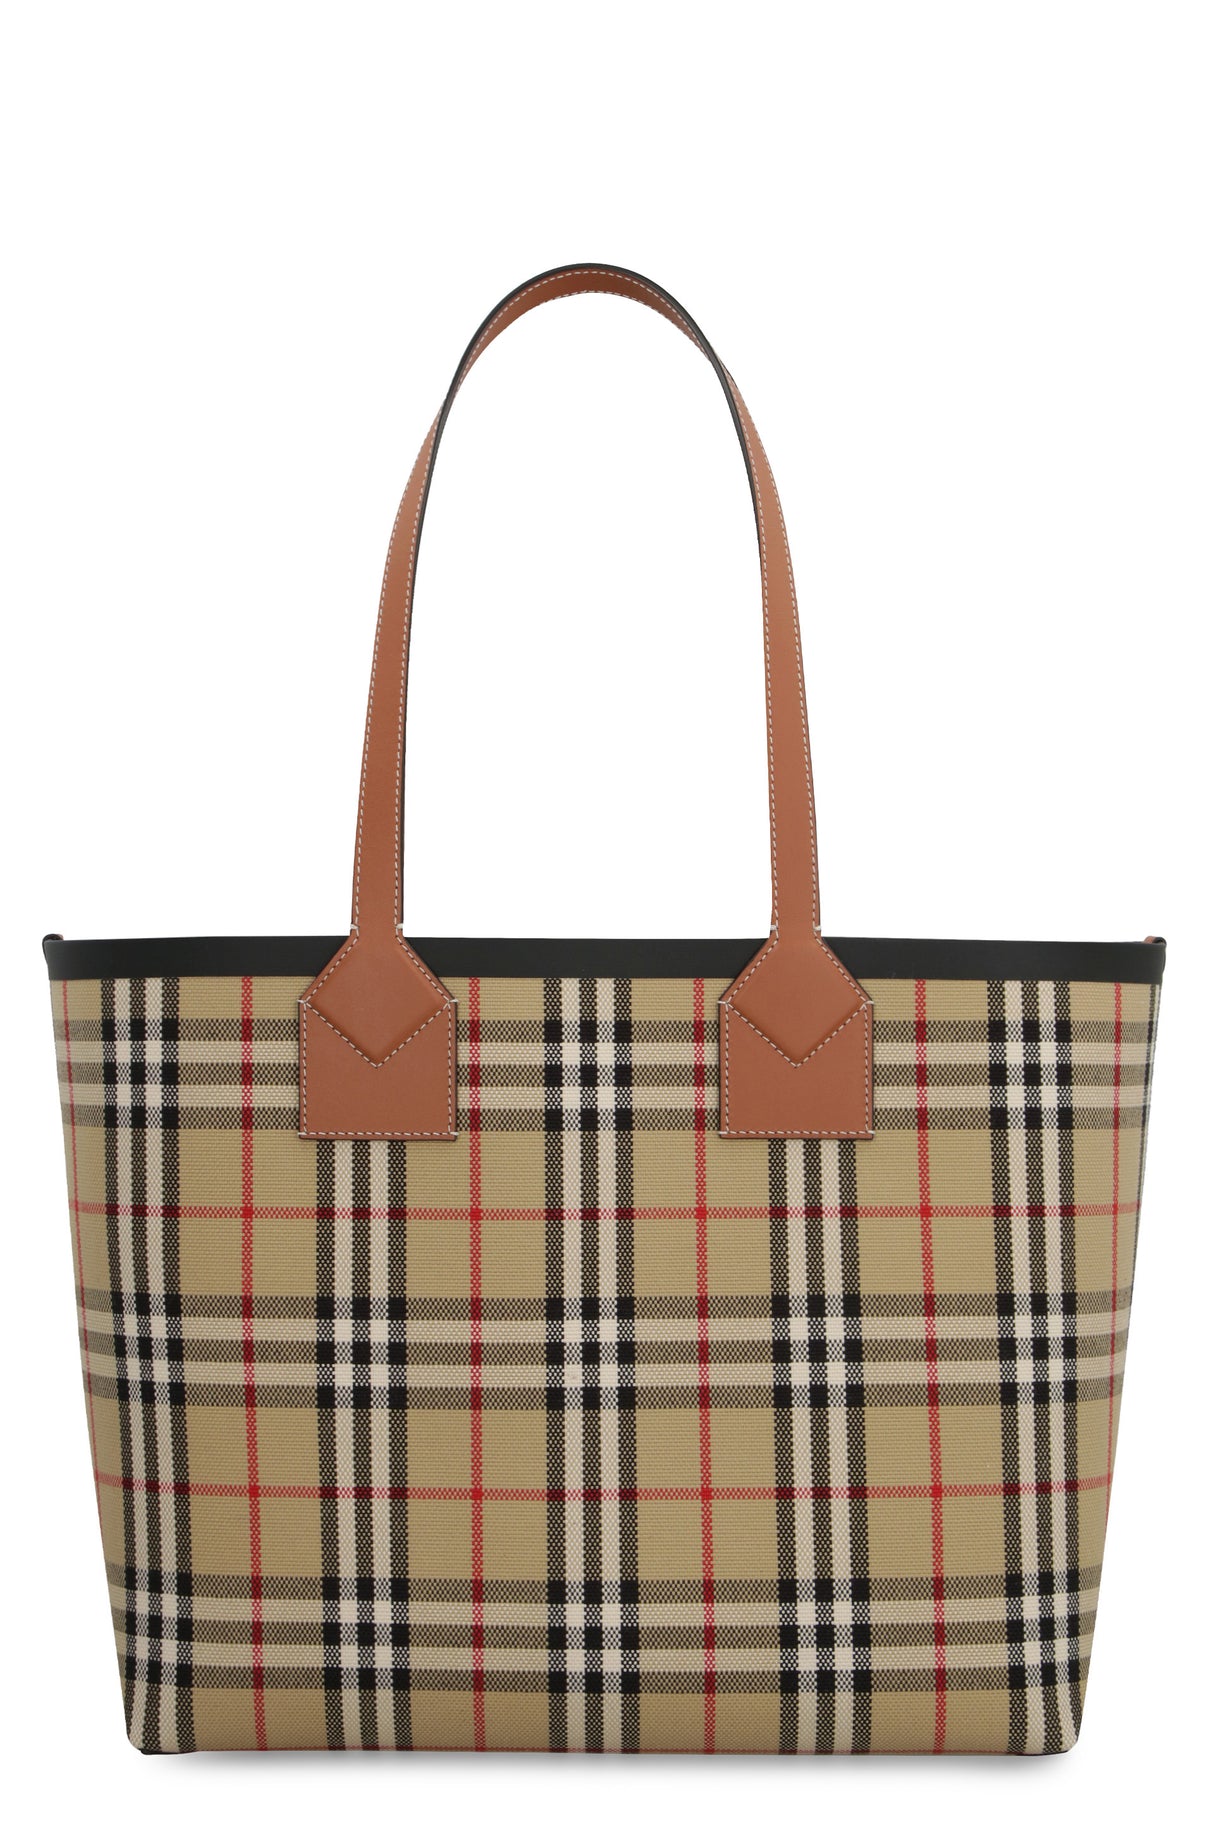 BURBERRY Sophisticated London Check-Pattern Tote Handbag for Women - Perfect for Any Occasion!